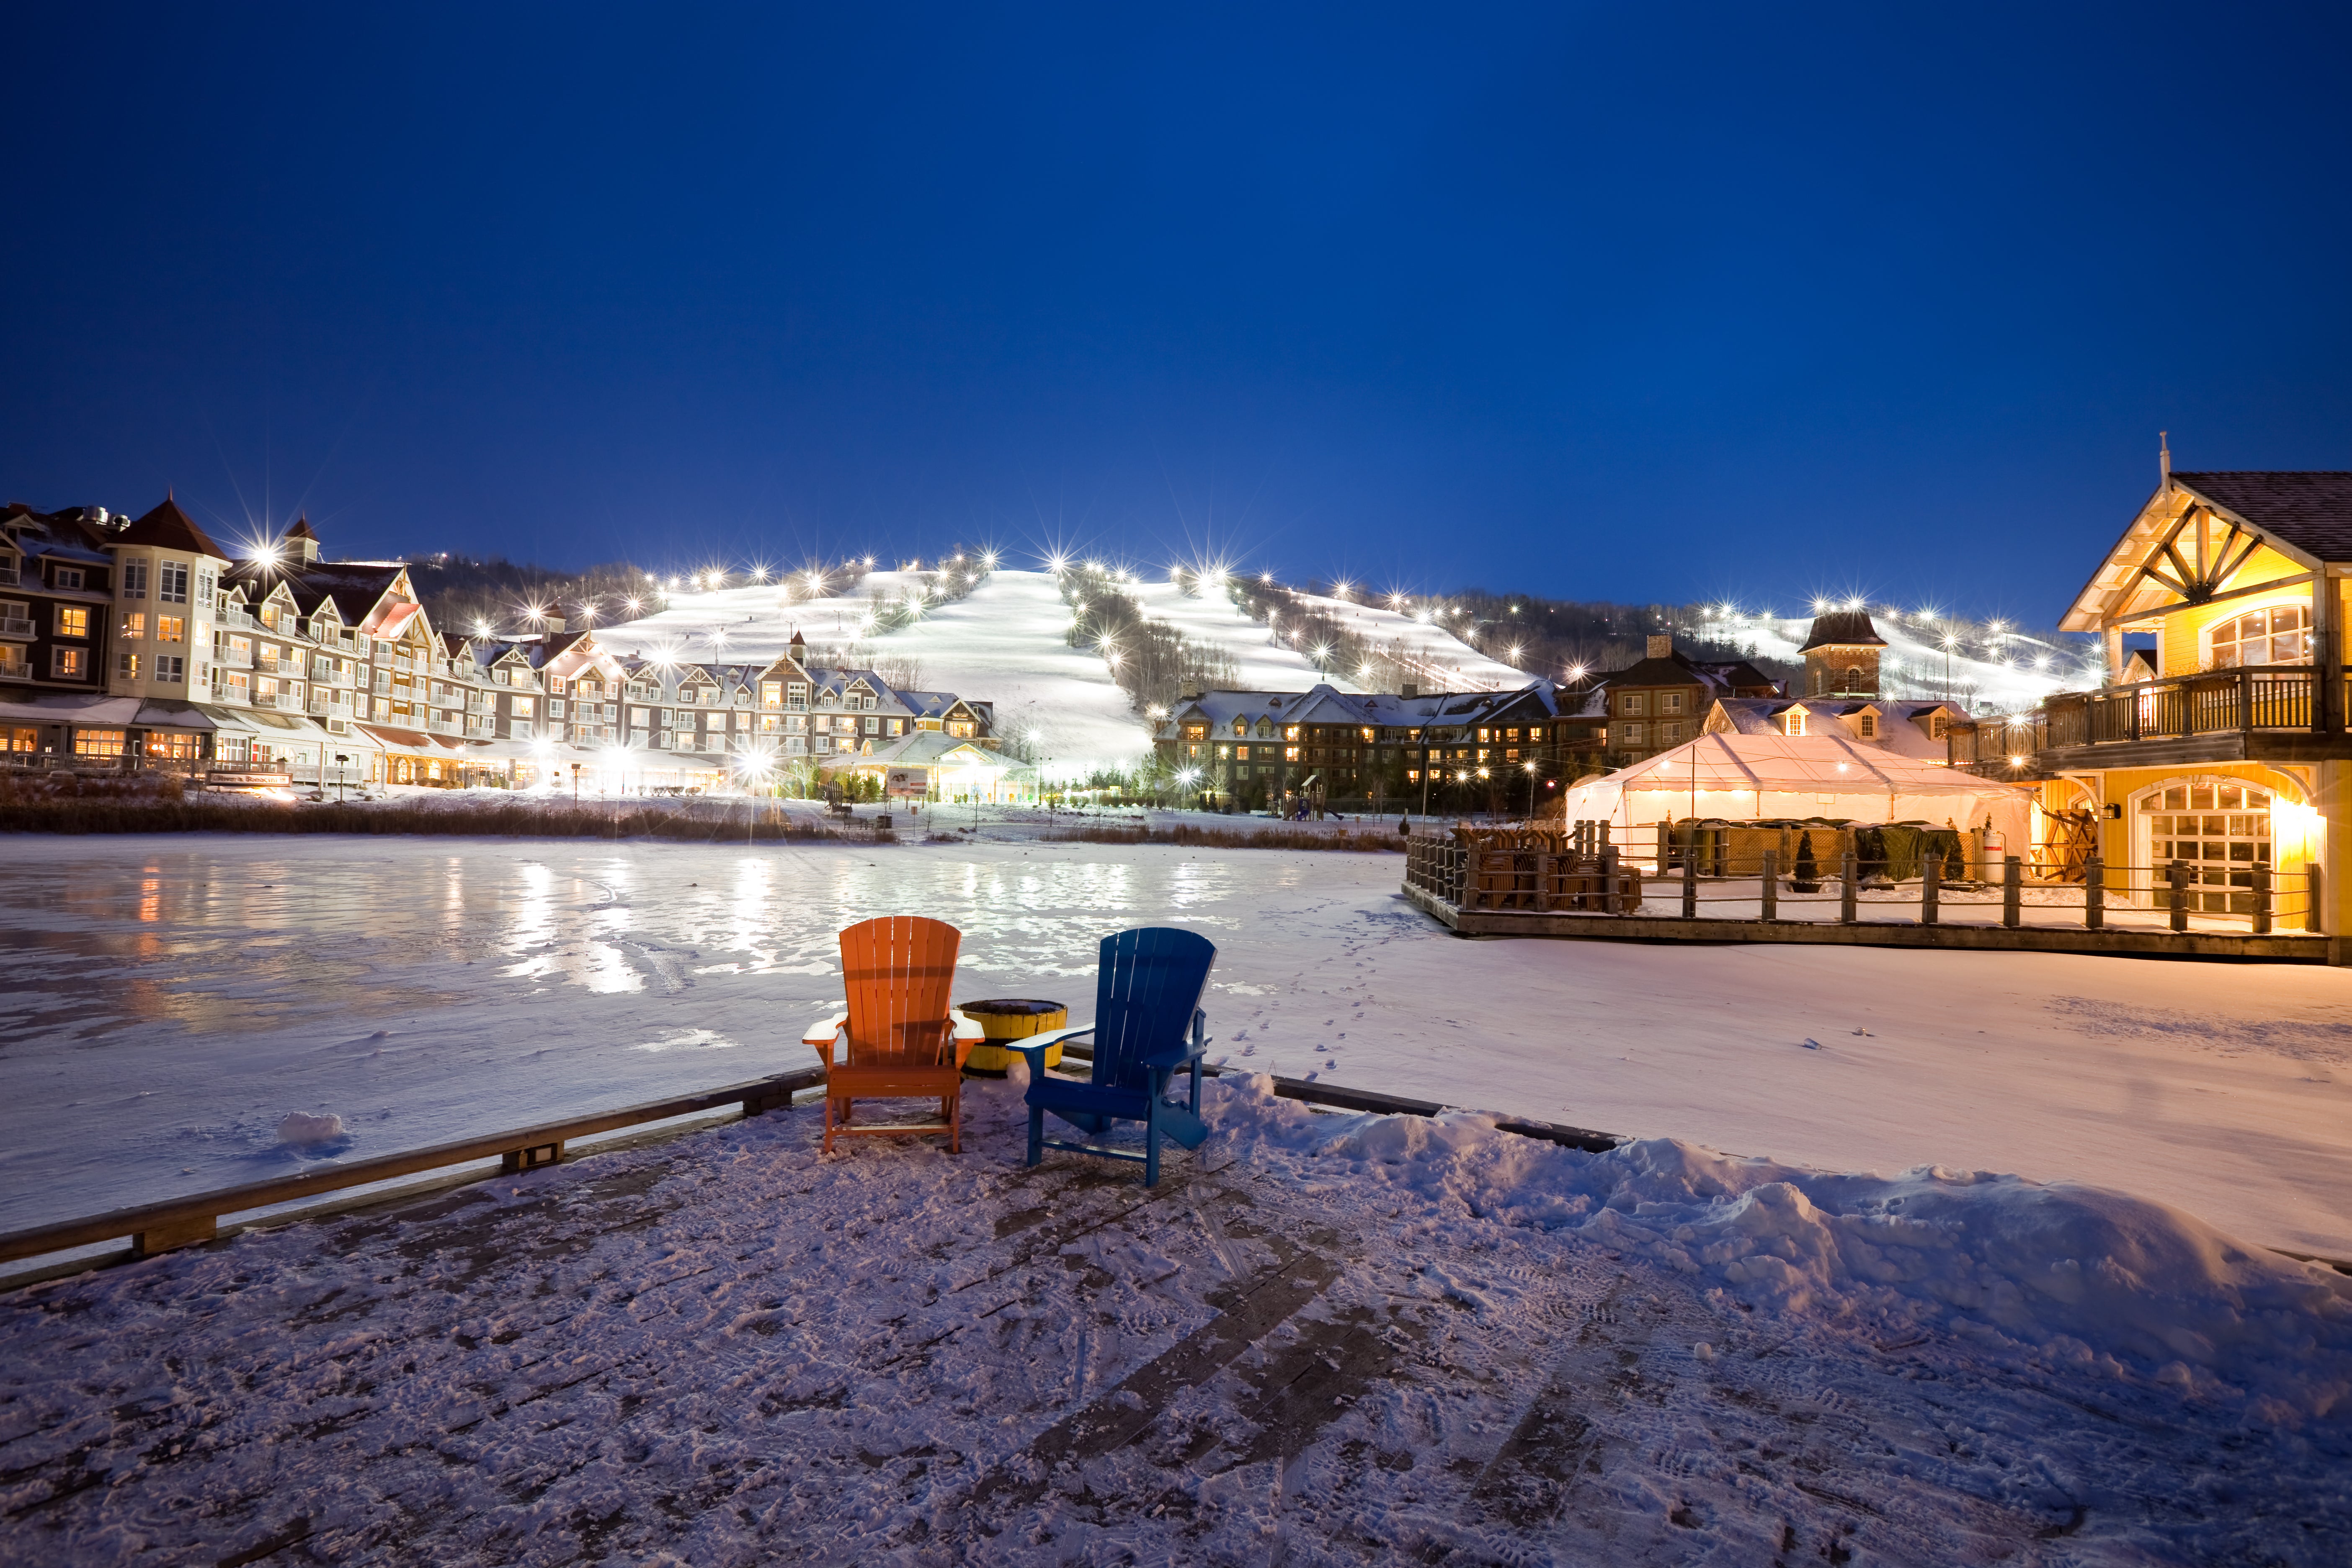 The Blue Mountain Resort in Collingwood can be reached in just two hours from Toronto